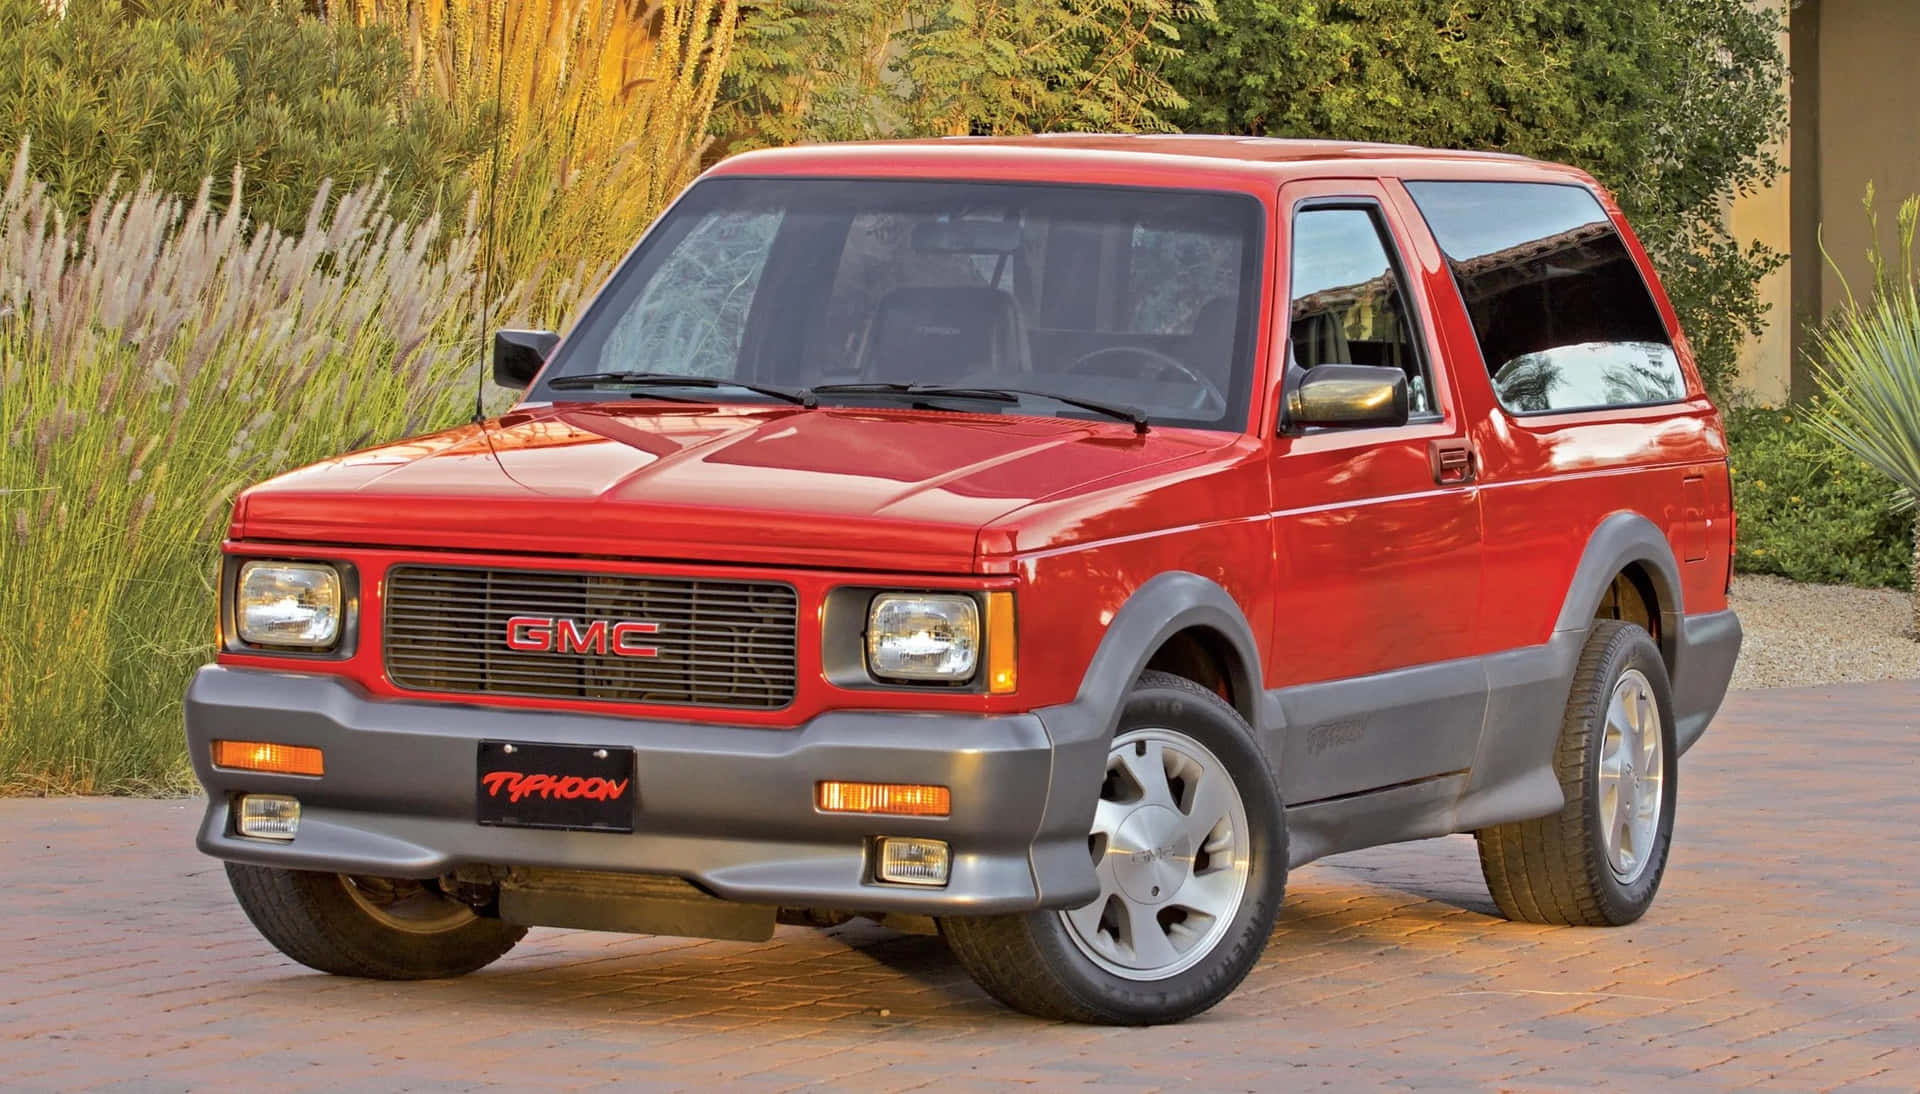 GMC Typhoon - Power and Performance in a Compact SUV Wallpaper